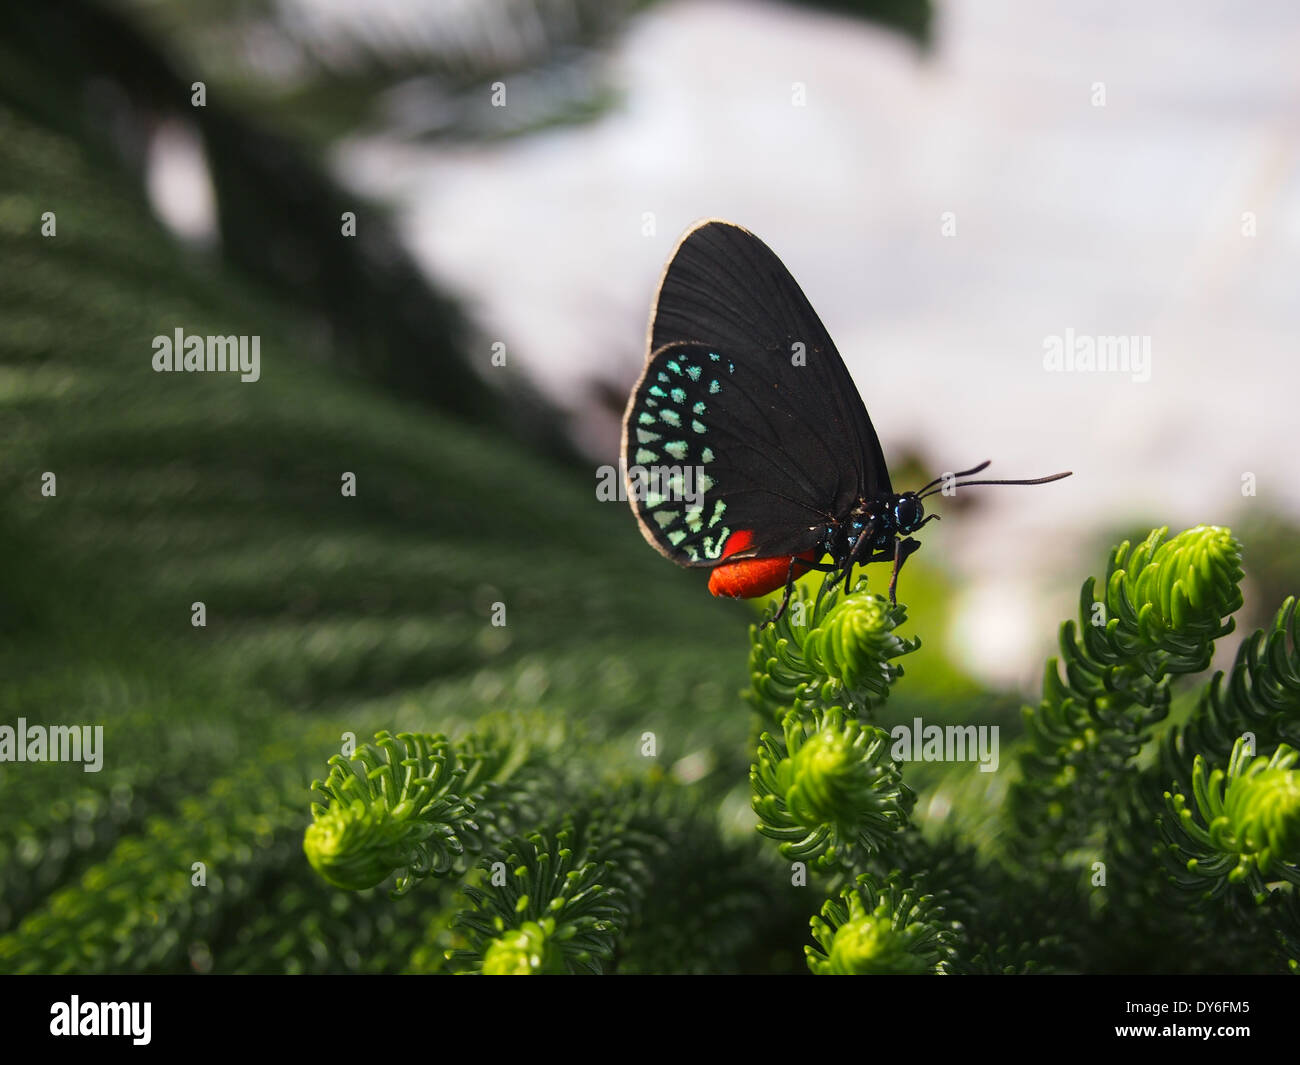 Black red and blue butterfly on evergreen tree Stock Photo